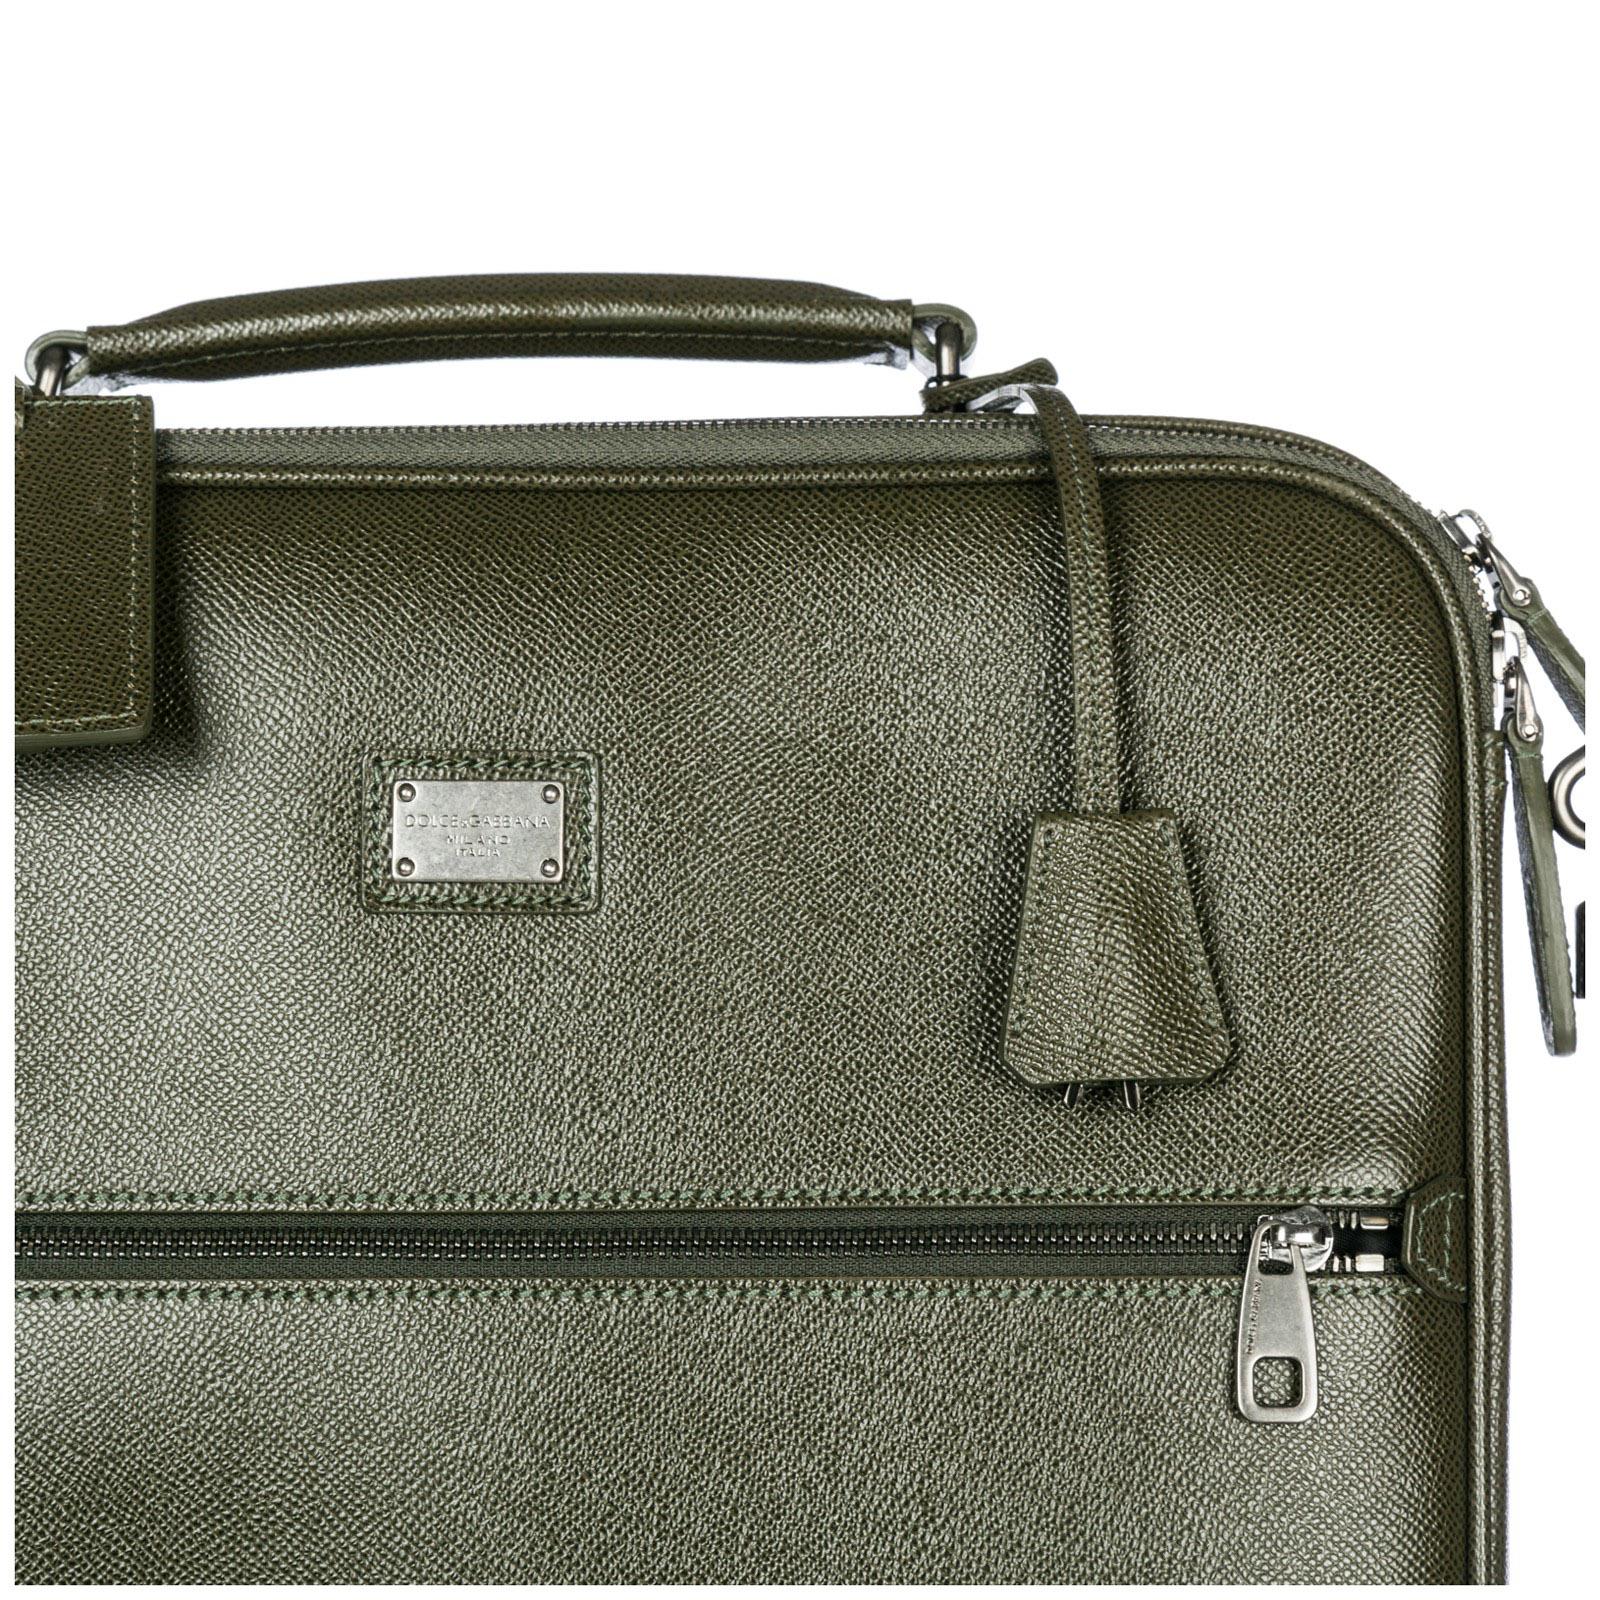 Dolce & Gabbana Trolley Leather Suitcase luggage in Green for Men - Lyst